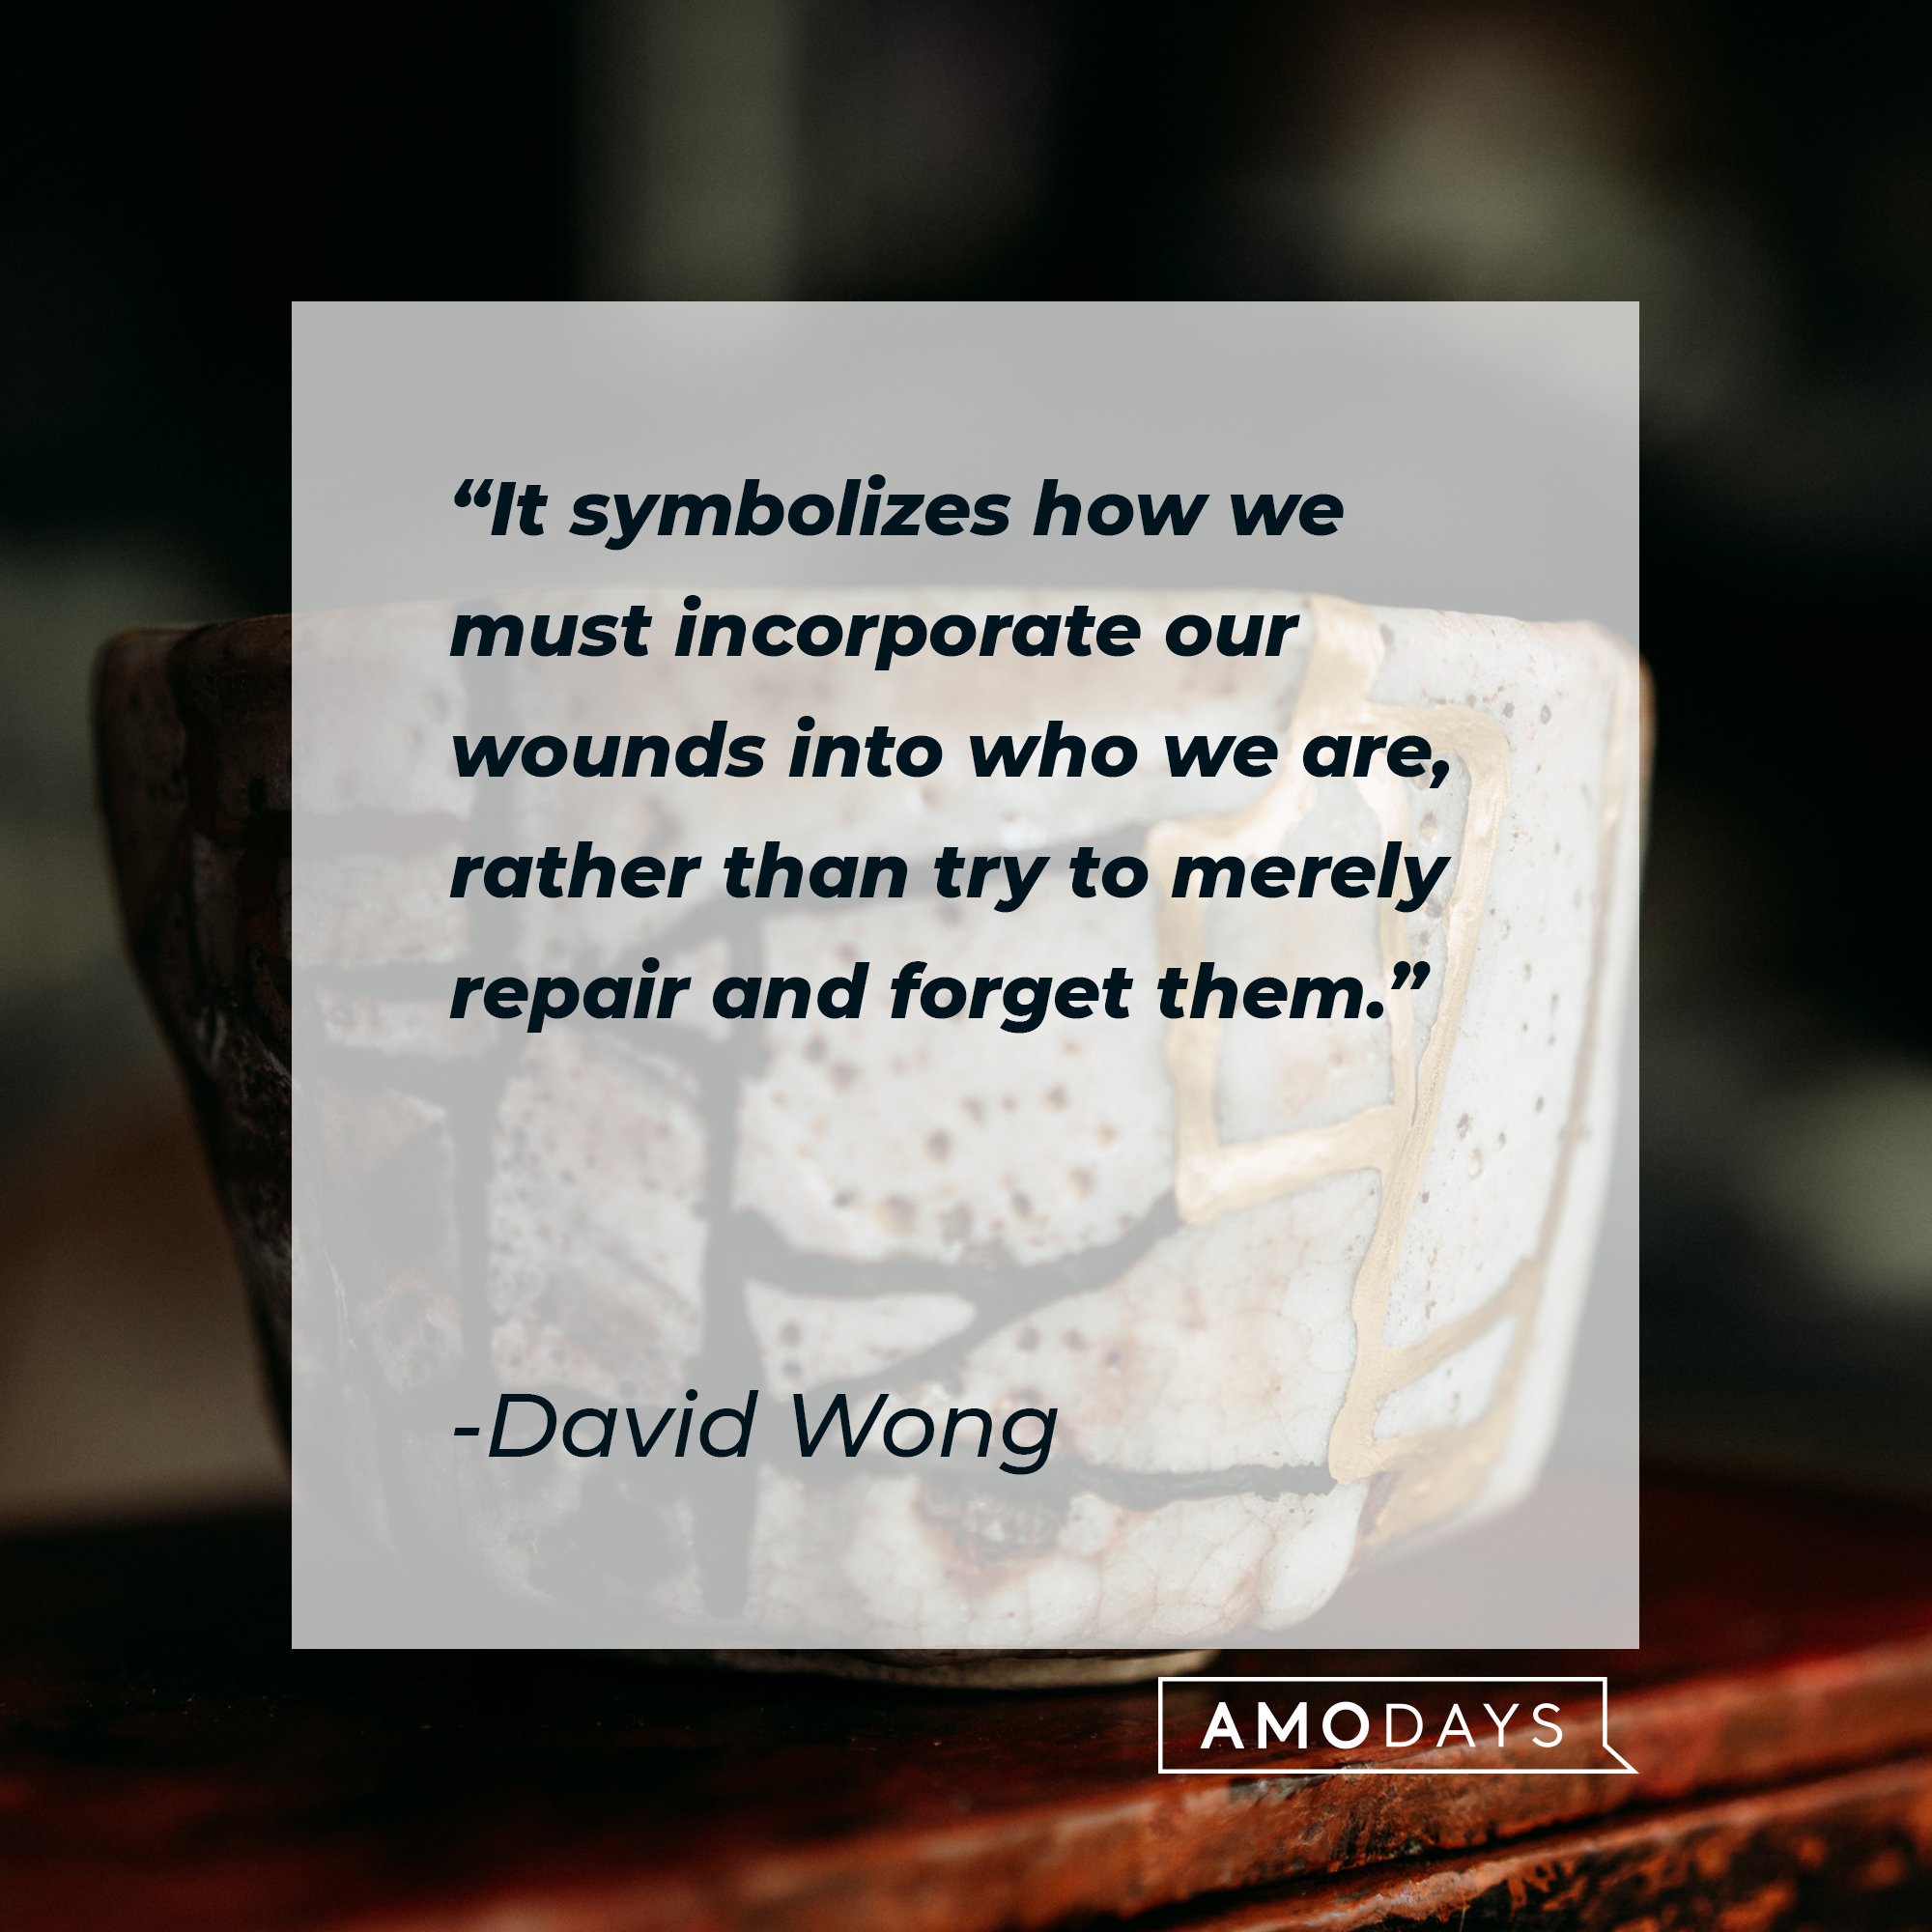  David Wong’s quote: "It symbolizes how we must incorporate our wounds into who we are, rather than try to merely repair and forget them.” | Image: AmoDays